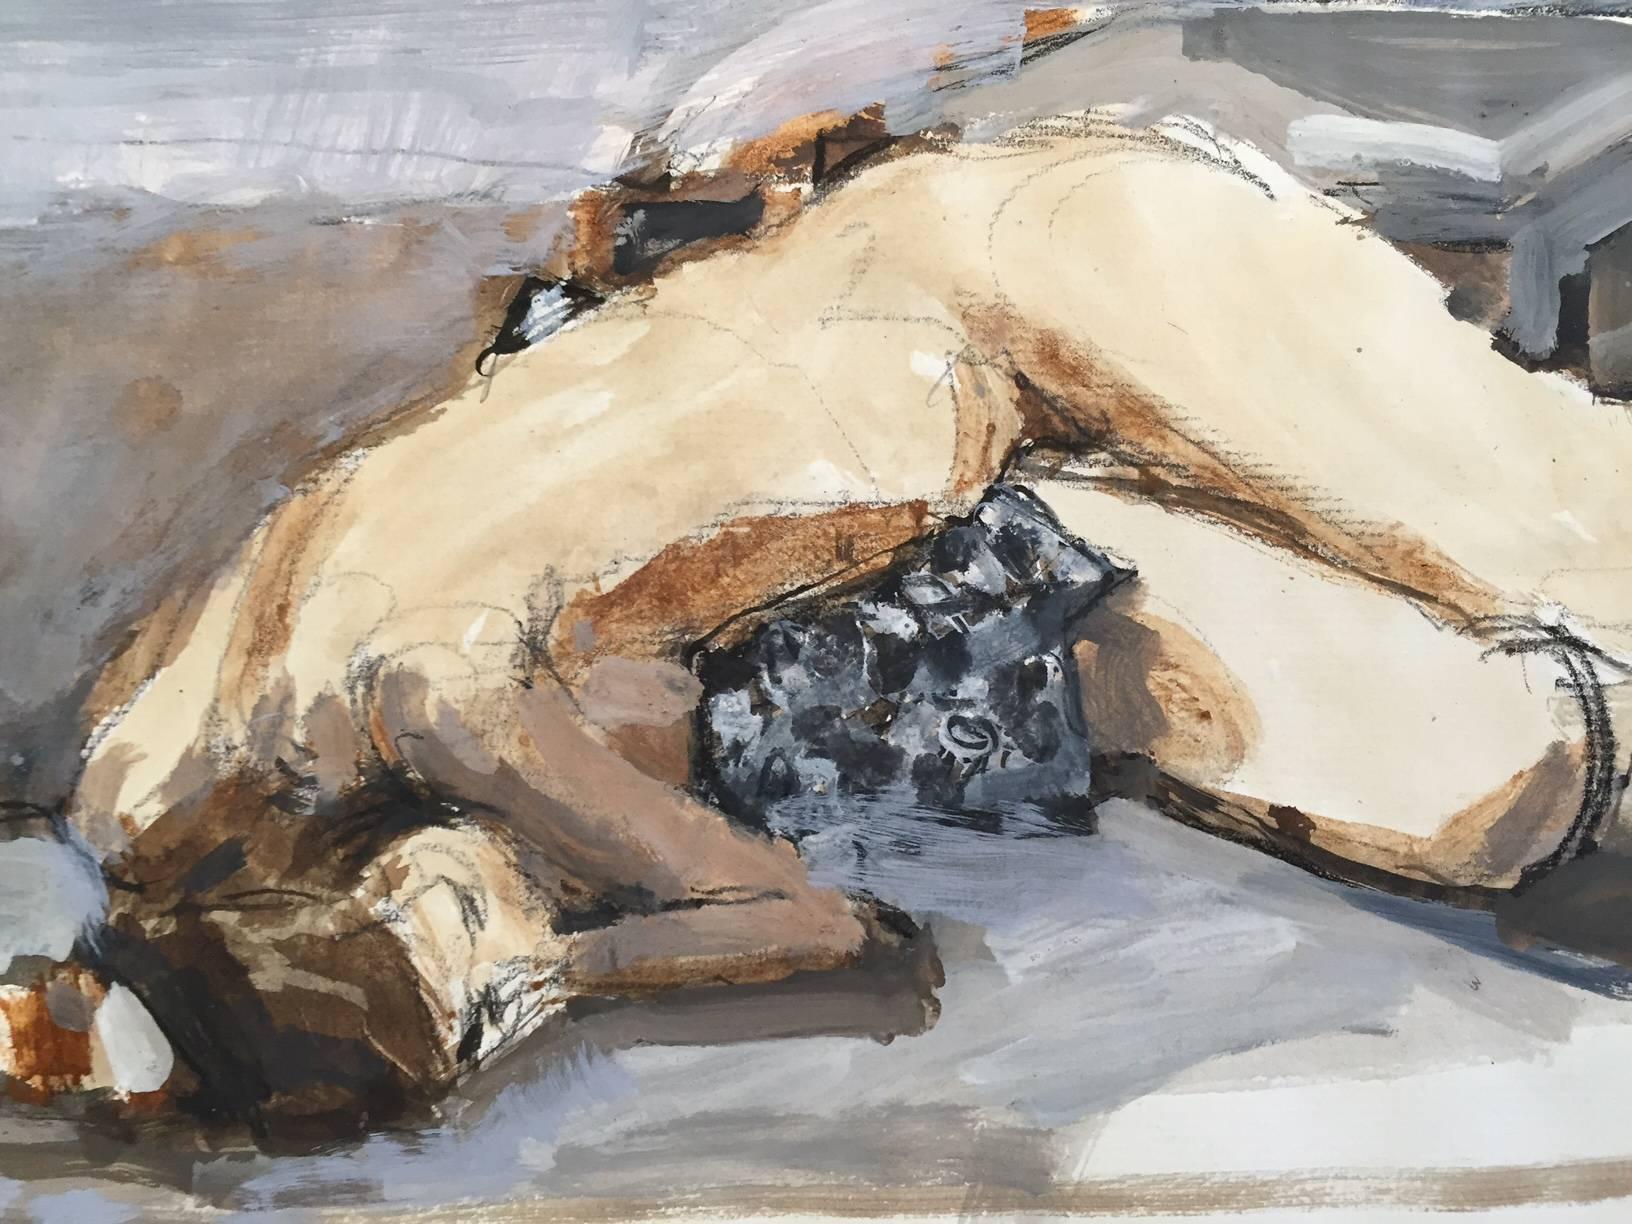 Original acrylic mixed media painting on laid cream paper from 2011 in excellent condition. Sleeping female figure in grey and rust with stripes. 
Signed and dated on the front lower left and dated and titled on the verso. Painting is 11 x 14 3/4